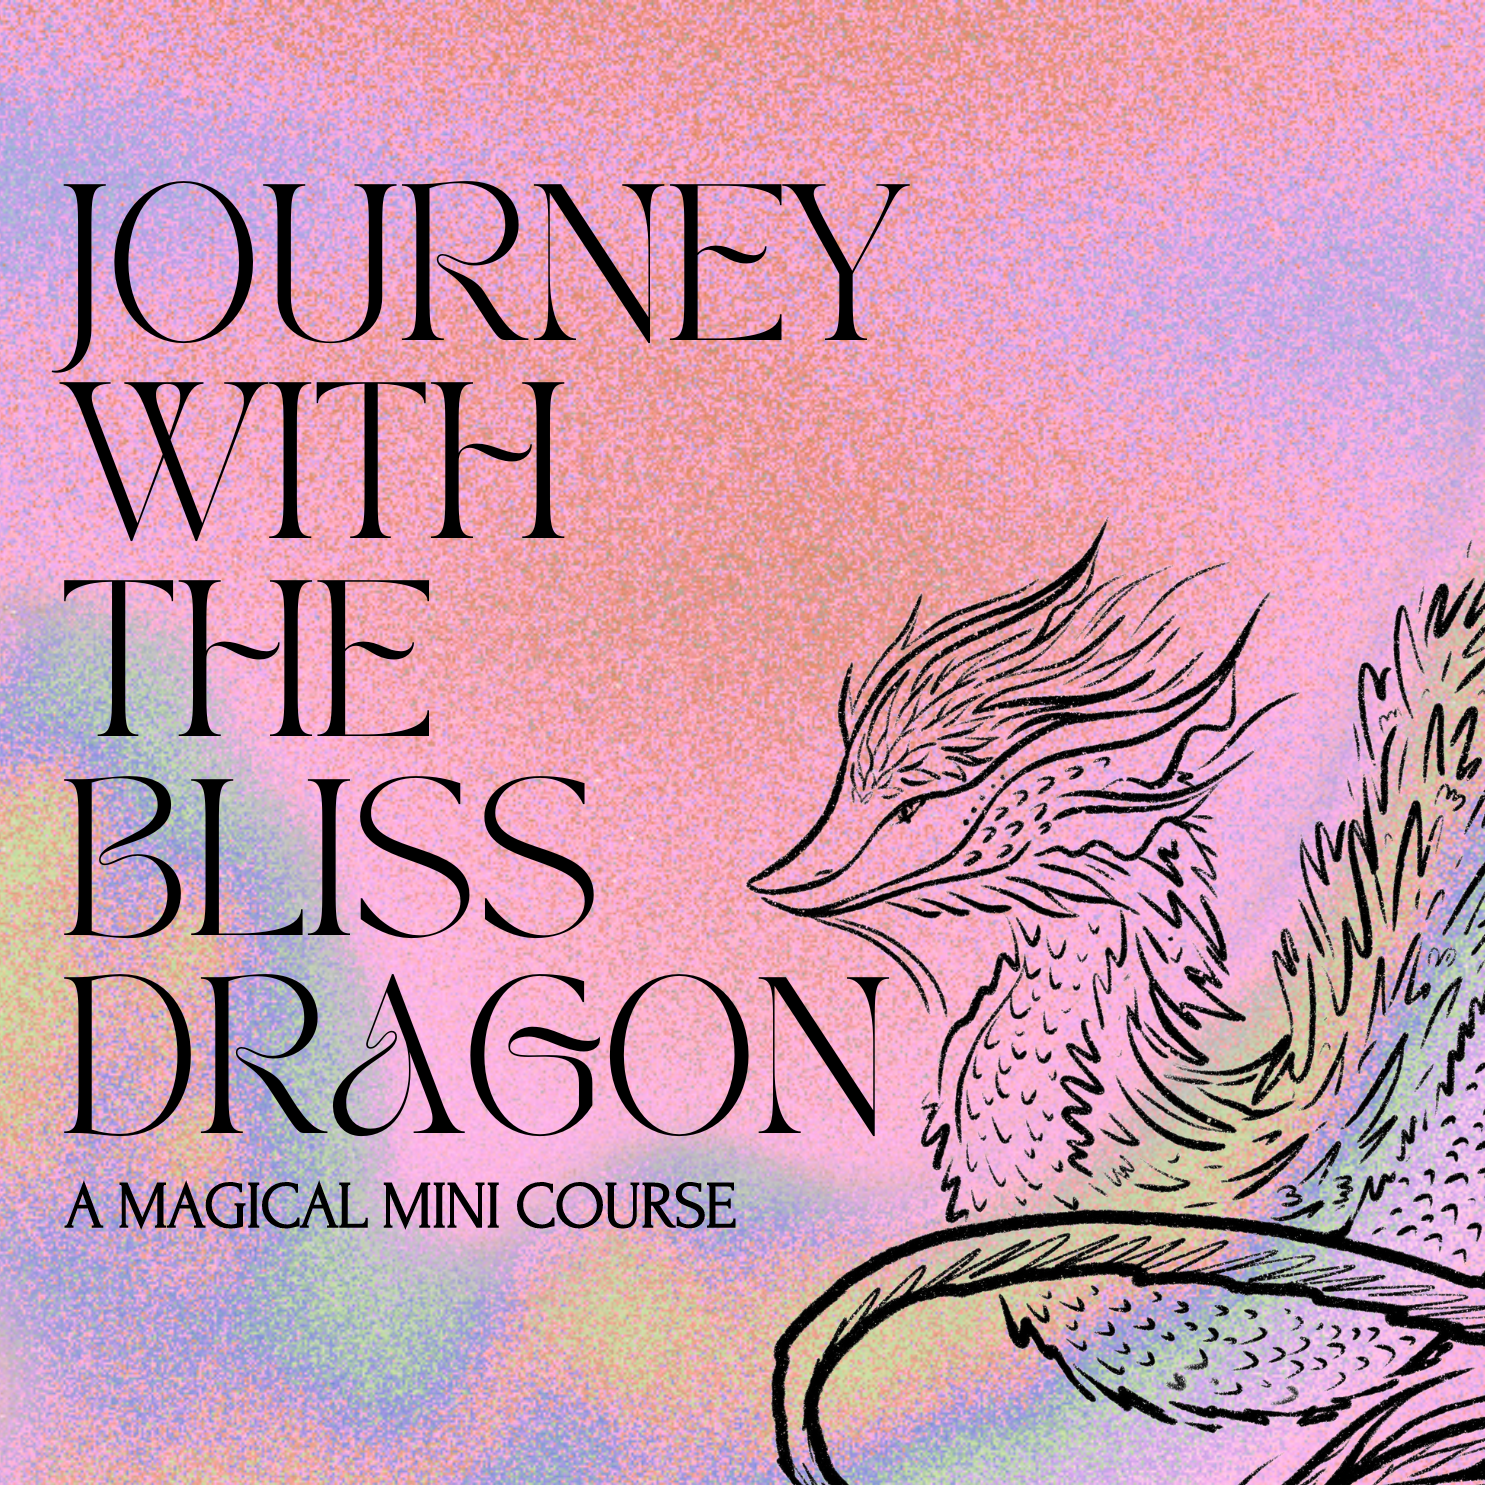 Journey with the Bliss Dragon